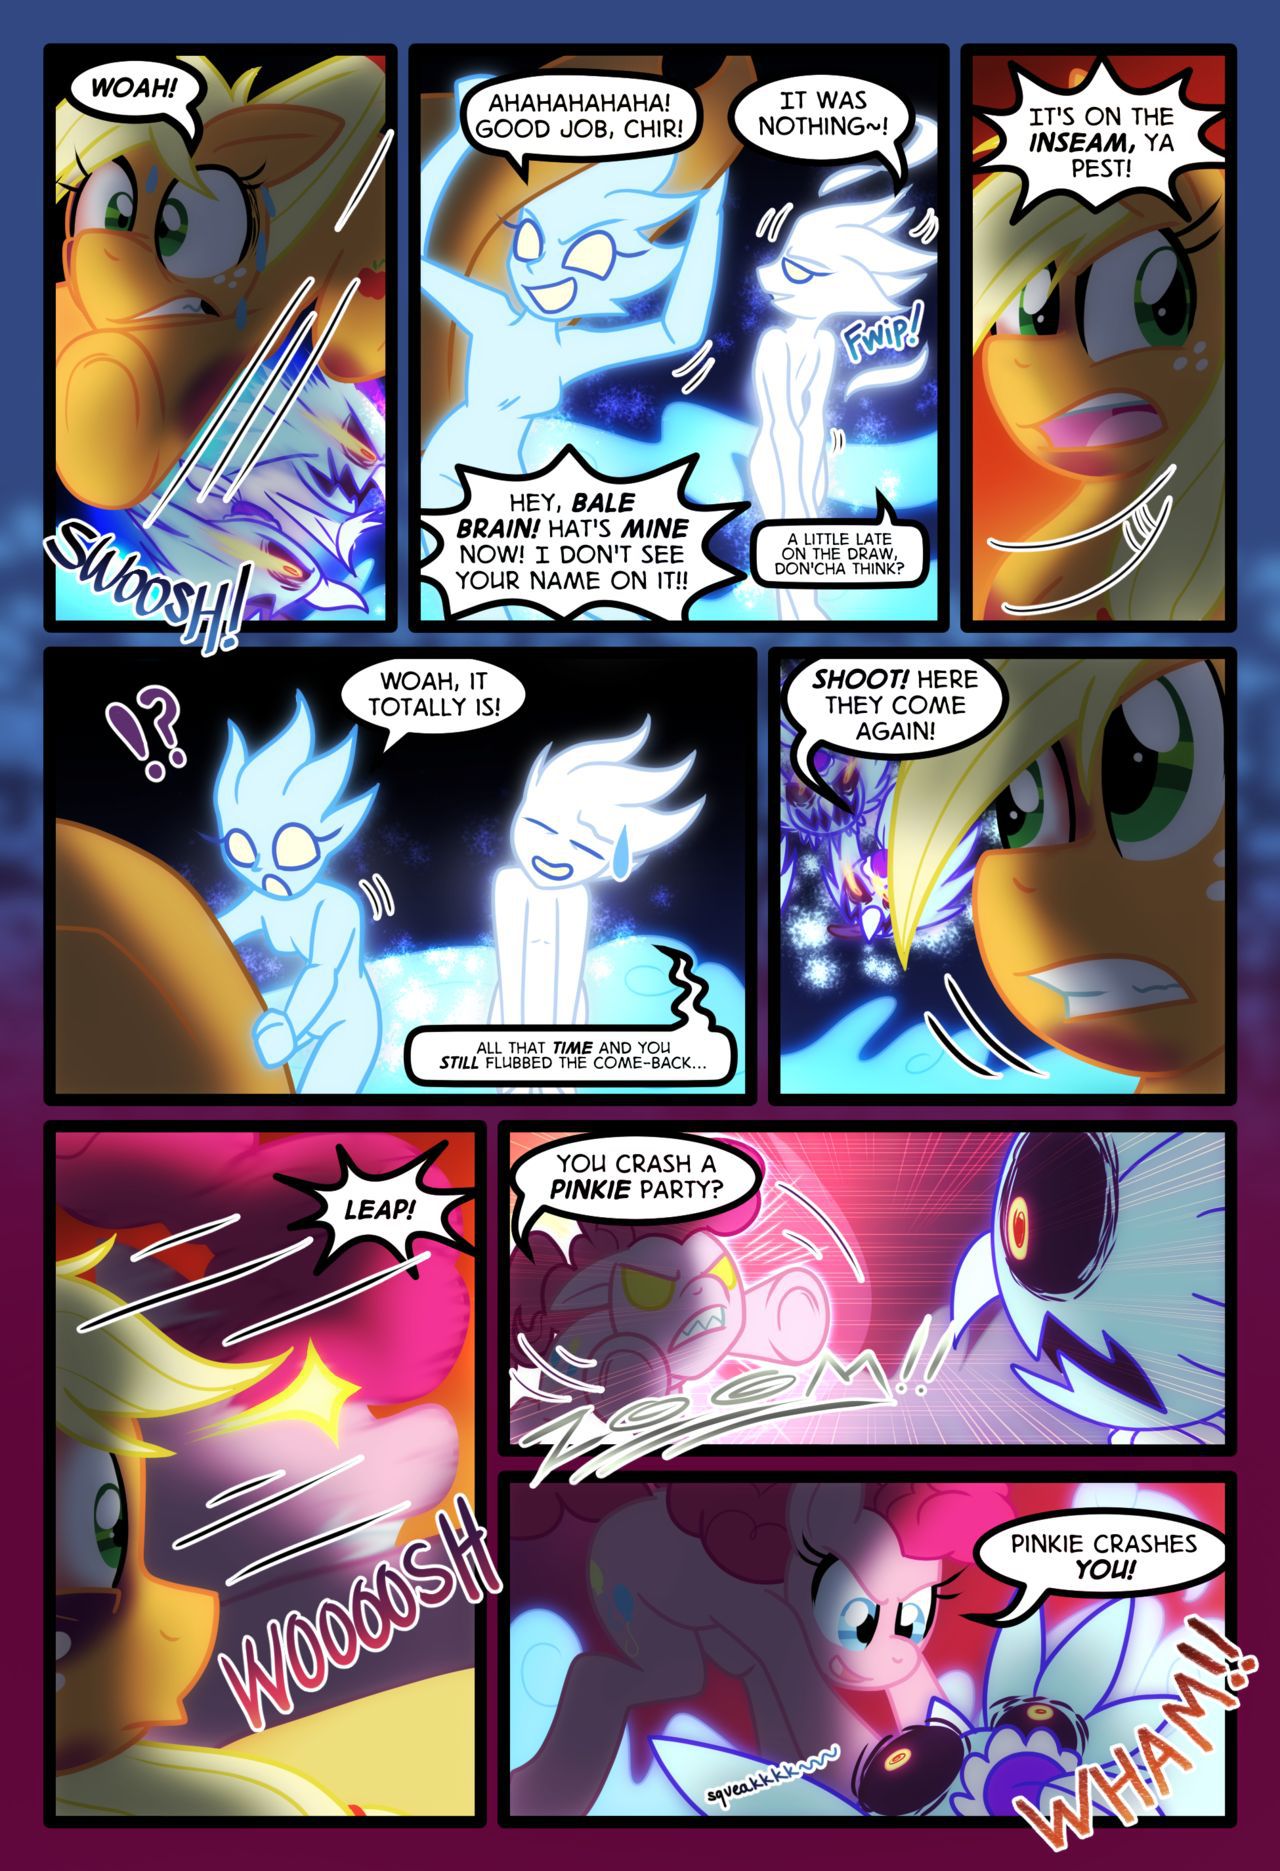 [Zaron] Lonely Hooves (My Little Pony Friendship Is Magic) [Ongoing] 136